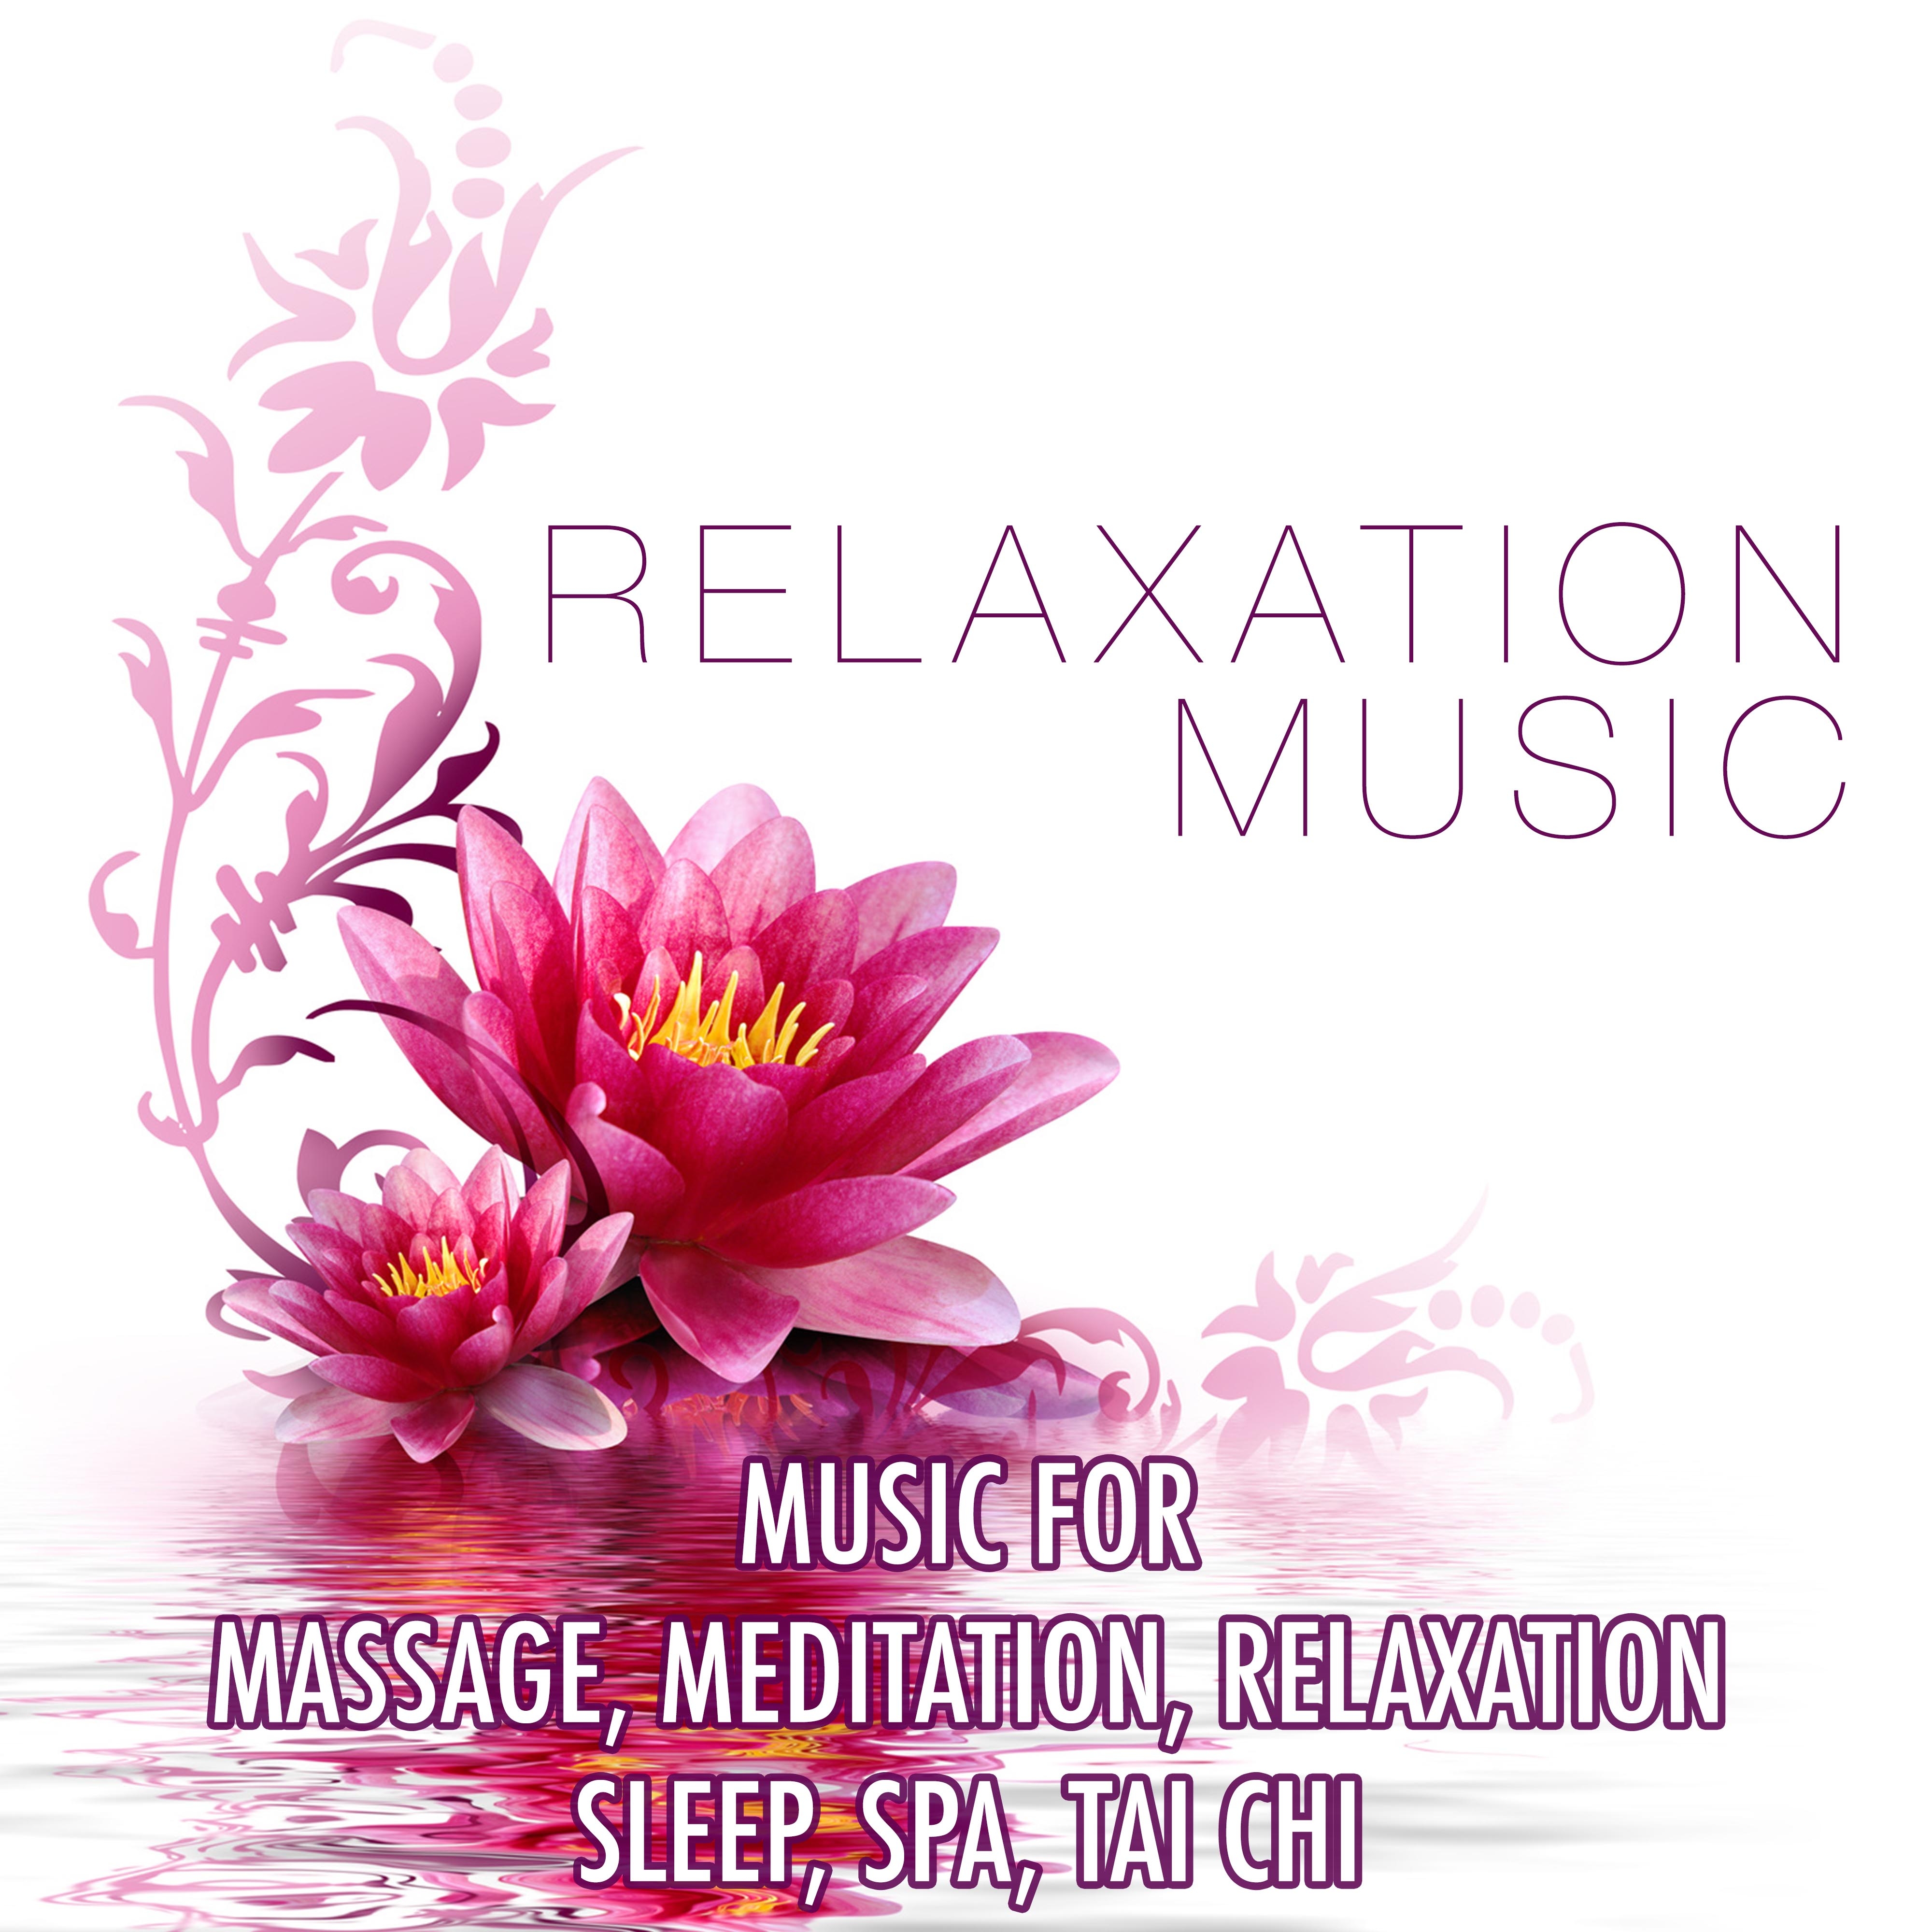 Relaxation Music: Music for Massage, Meditation, Relaxation, Sleep, Spa, Tai Chi and Soothing Lullabies to Help You Relax, Meditate and Heal with Nature Sounds, Hang Drum and Natural White Noise